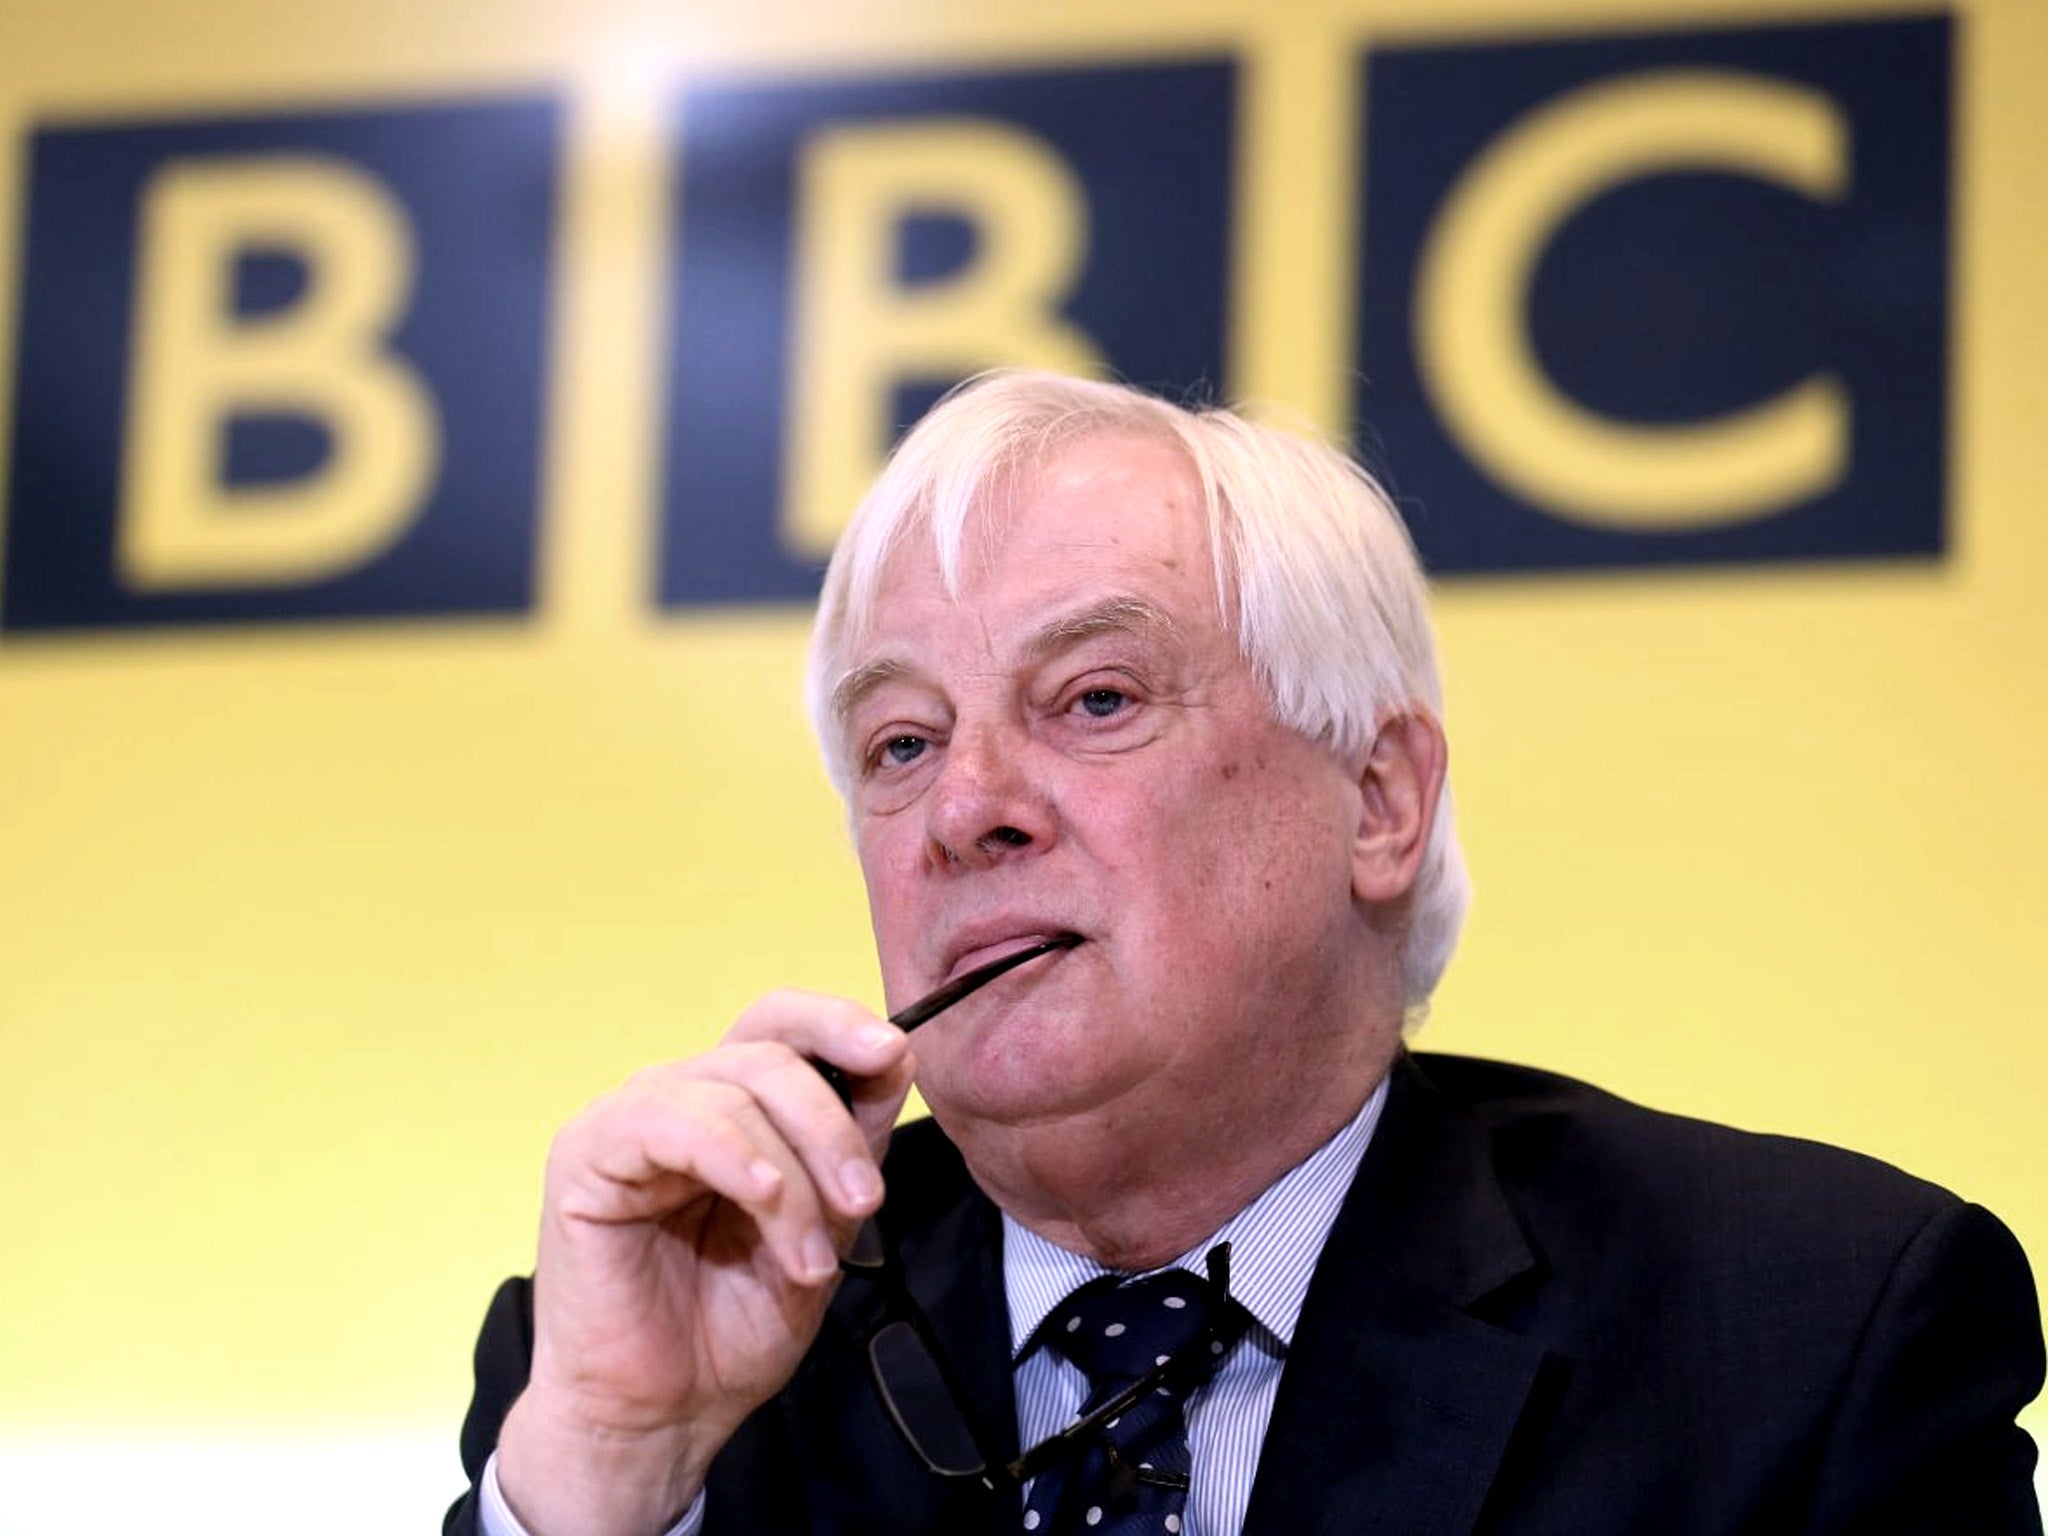 Lord Patten, who stepped down from his role as BBC Trust Chairman following major heart surgery, has been attacked by BBC broadcaster Nicky Campbell for his comments on female broadcasters.